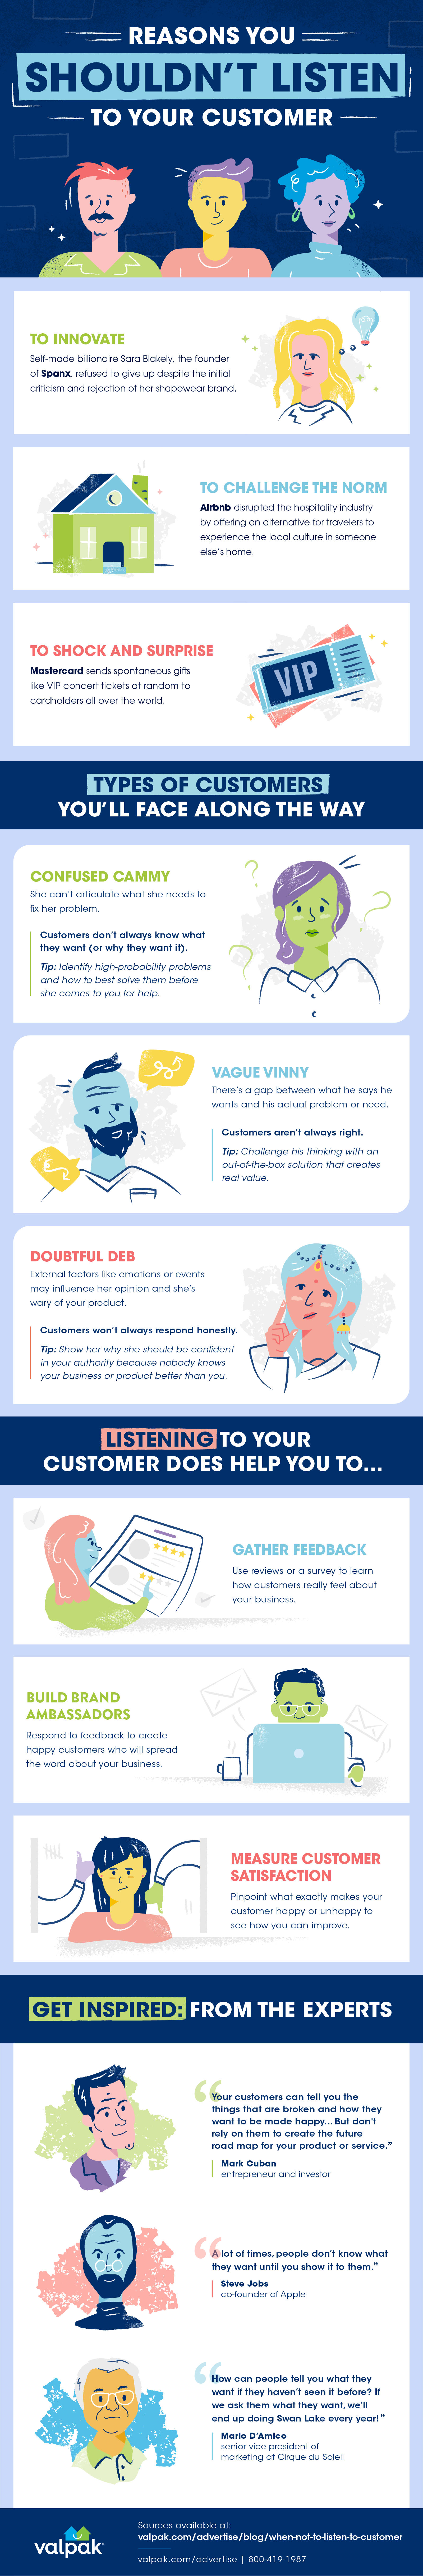 when not to listen to your customer infographic